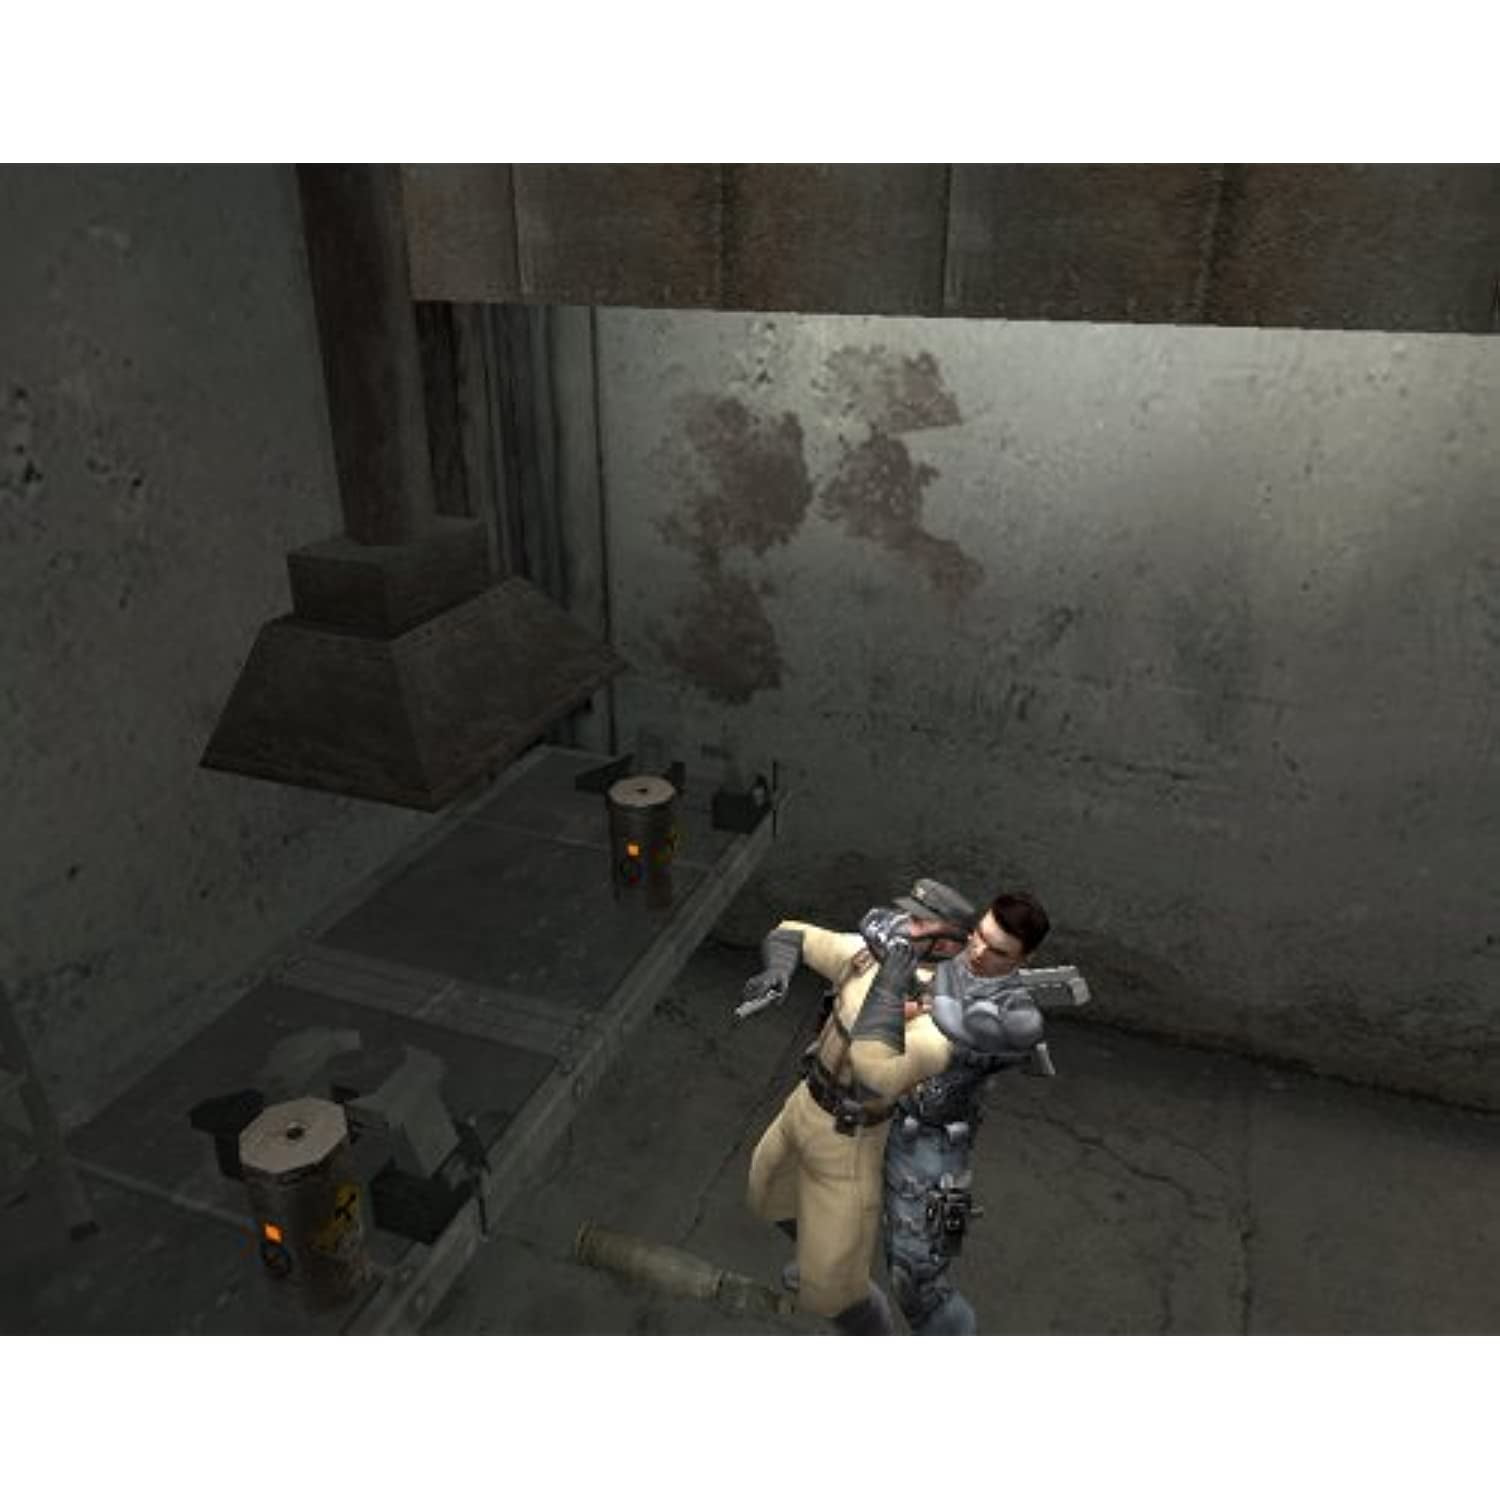 Syphon Filter: Dark Mirror stealthily gets ported to the Playstation 2 -  Siliconera